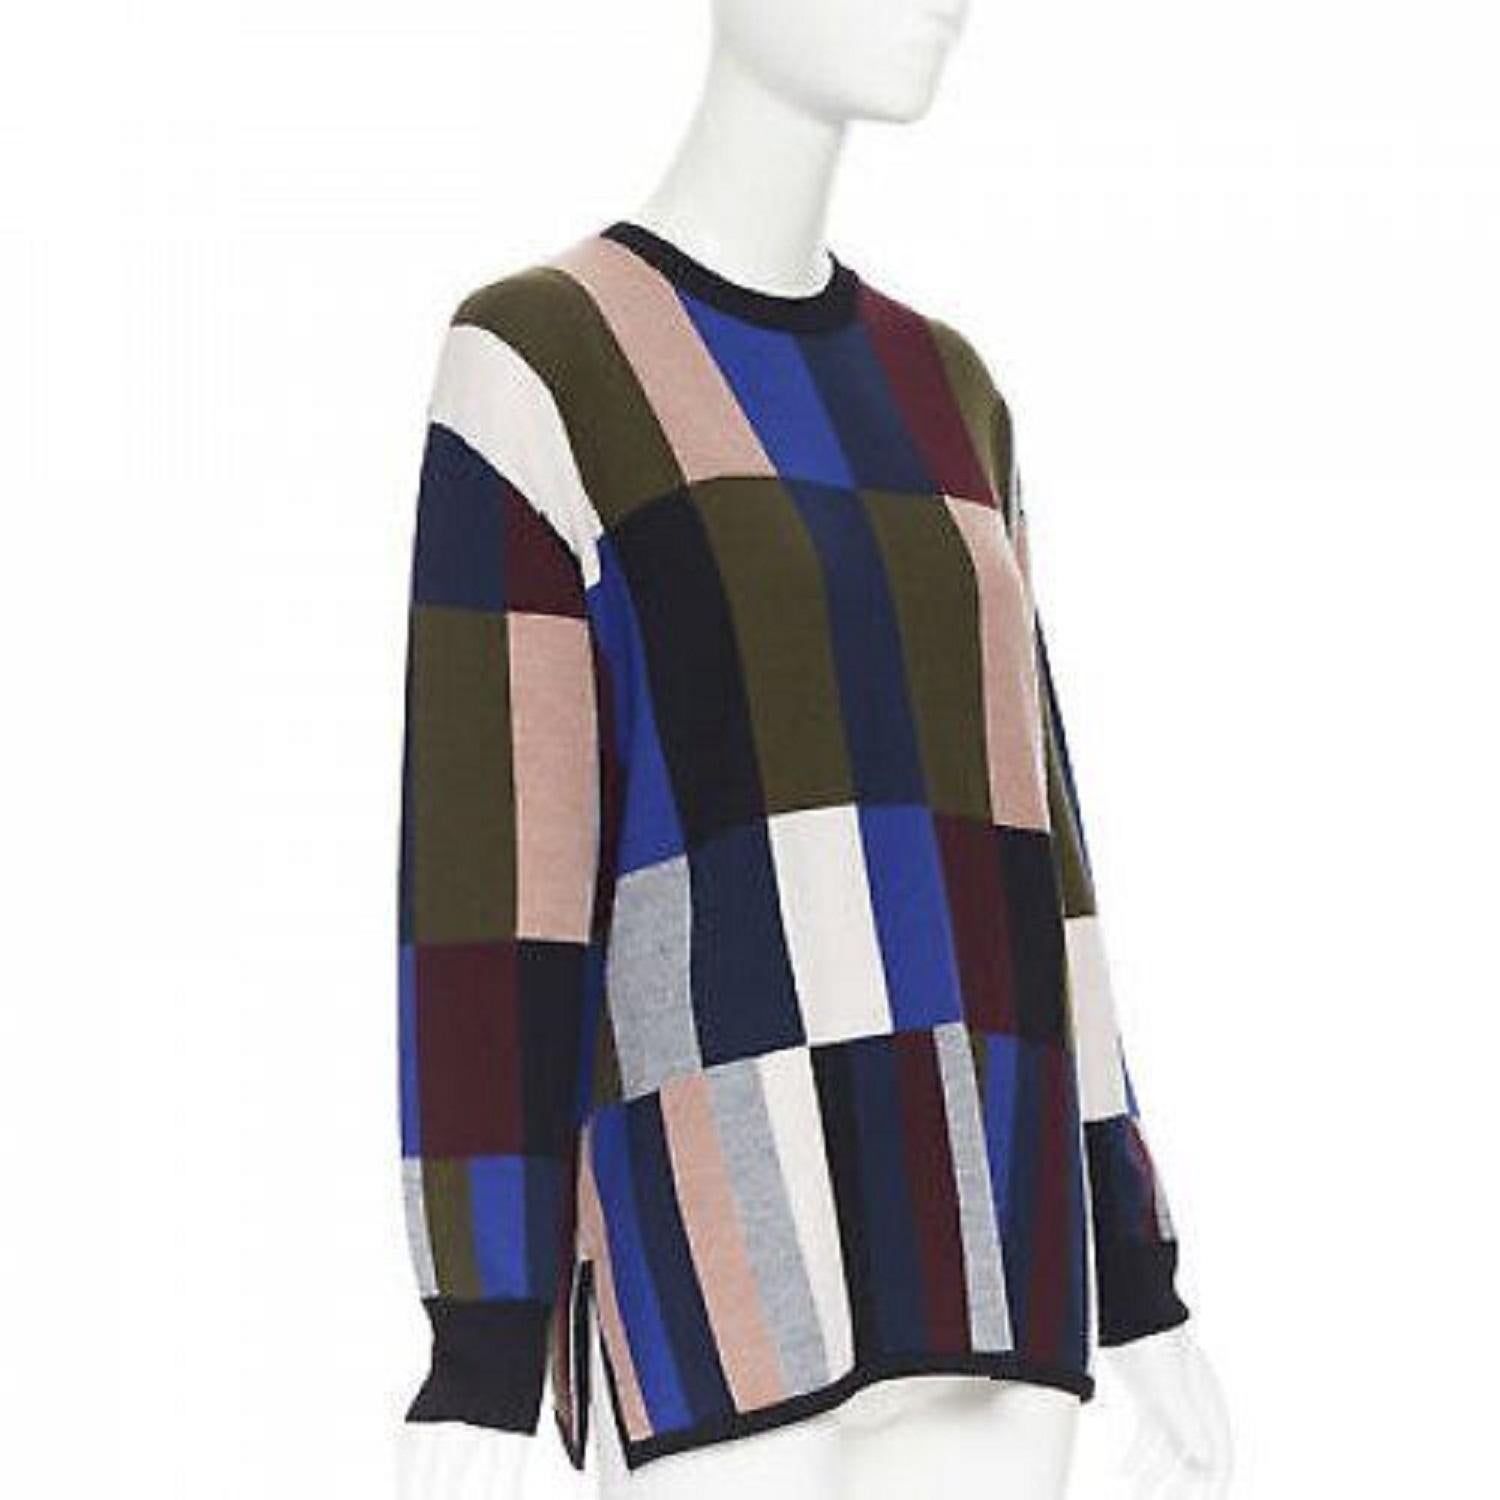 new VVB VICTORIA BECKHAM 100% wool graphic colorblocked oversized sweater UK8
Reference: TGAS/A04883
Brand: Victoria Beckham
Designer: Victoria Beckham
Model: Colorblocked sweater
Collection: Fall Winter 2018
Material: Wool
Color: